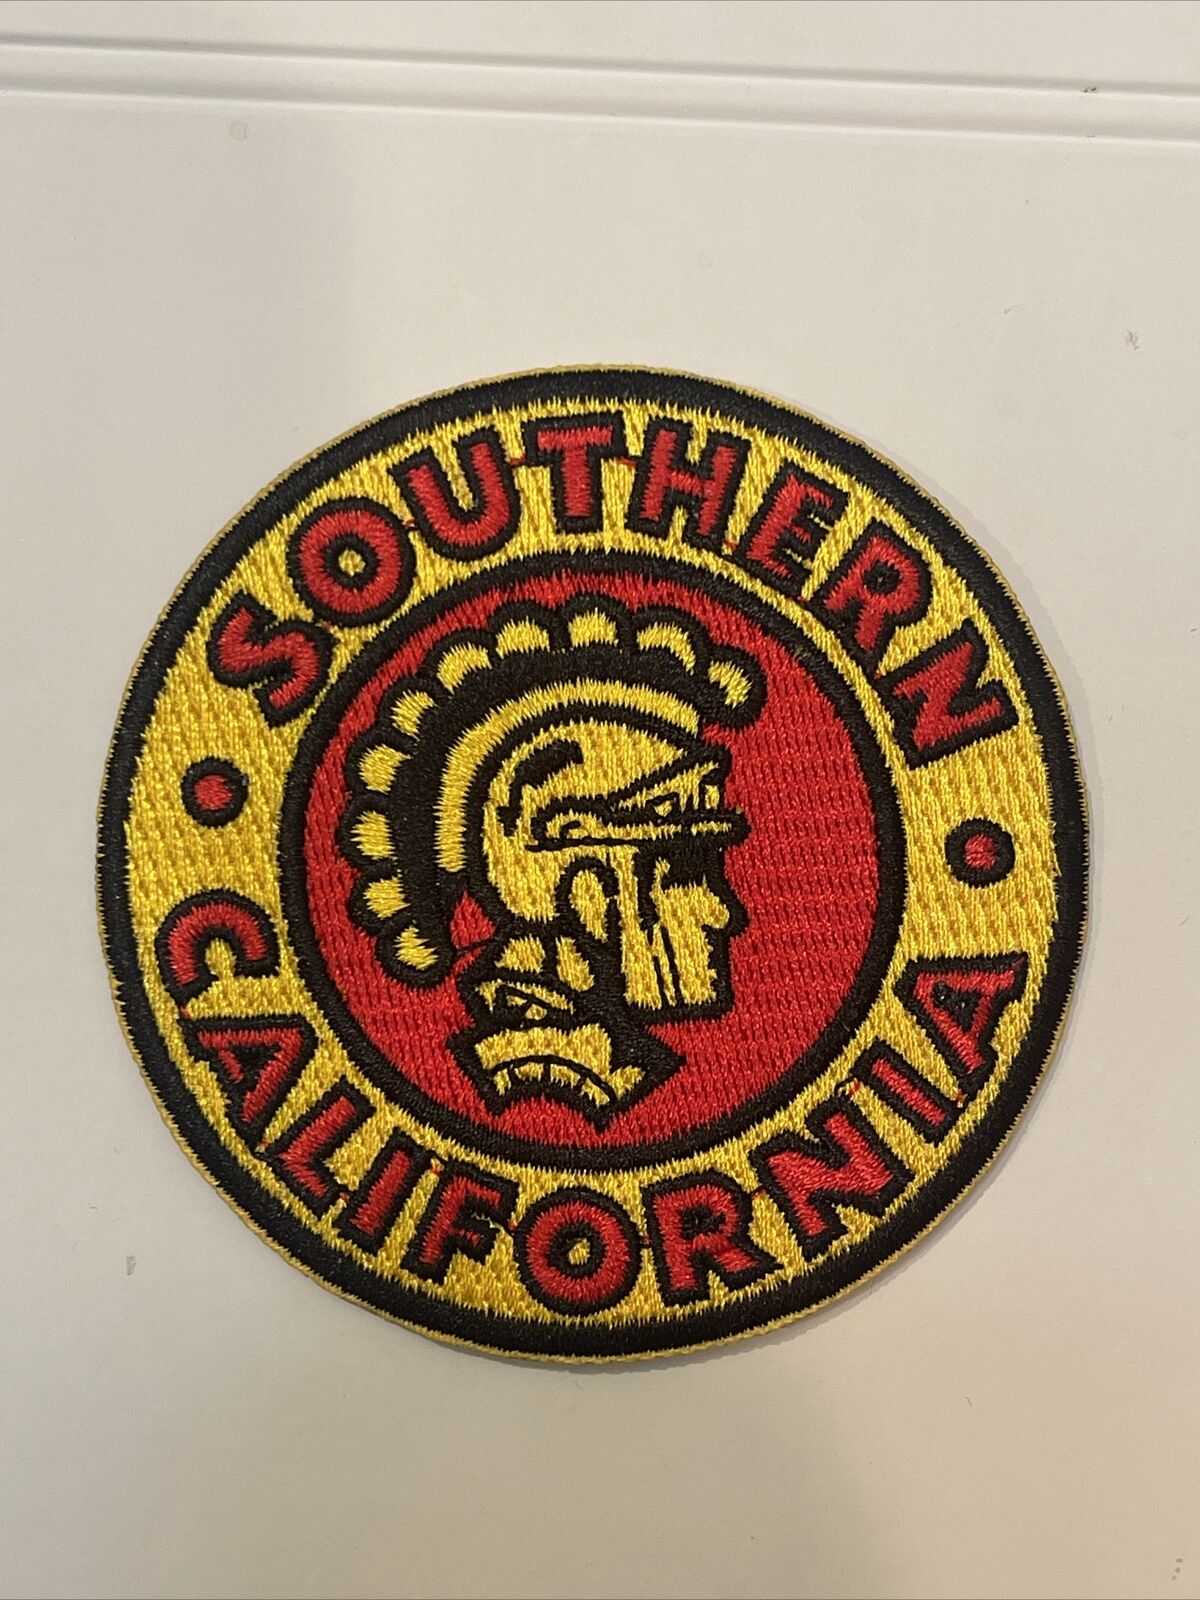 USC SOUTHERN CAL TROJANS Vintage Embroidered Iron On Patch  3” X 3”